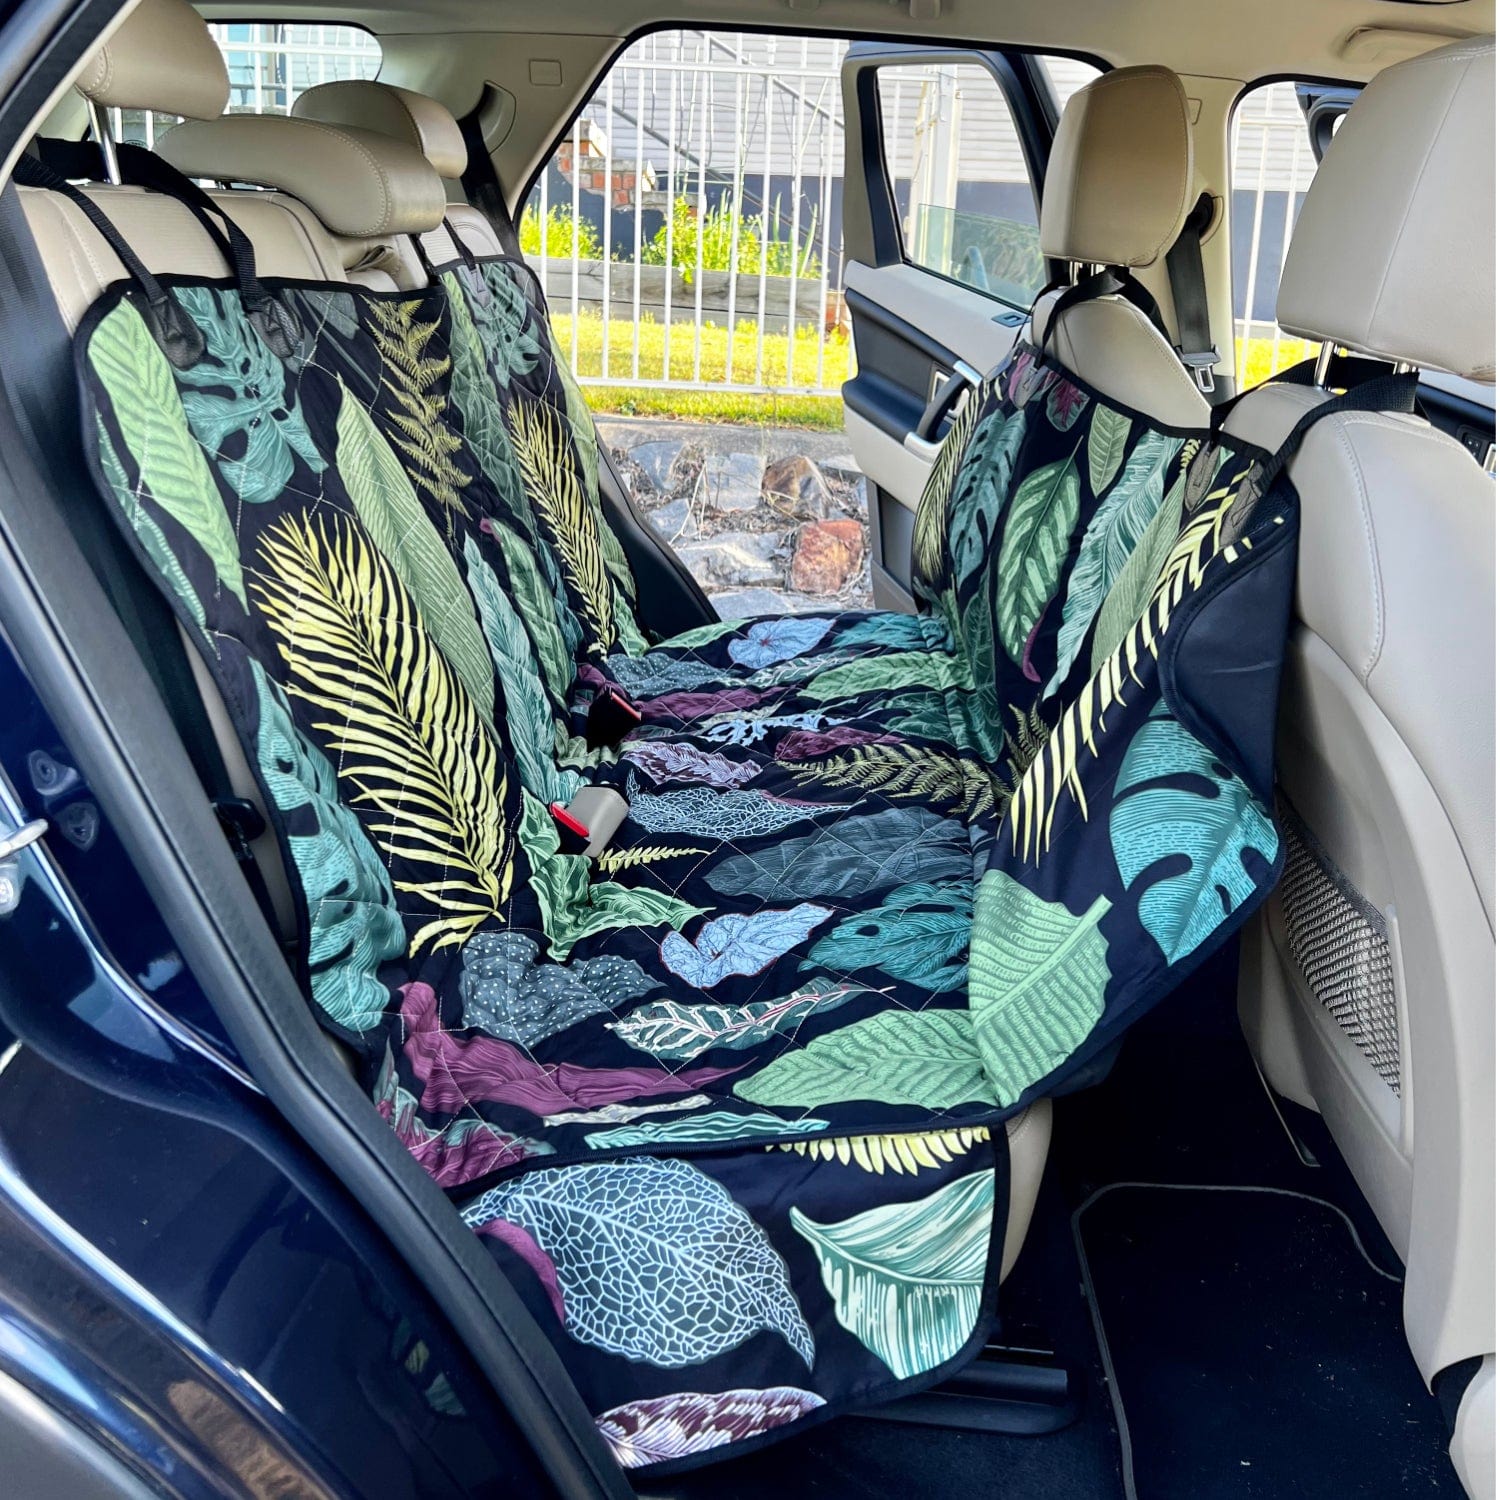 Dog Car Seat Covers